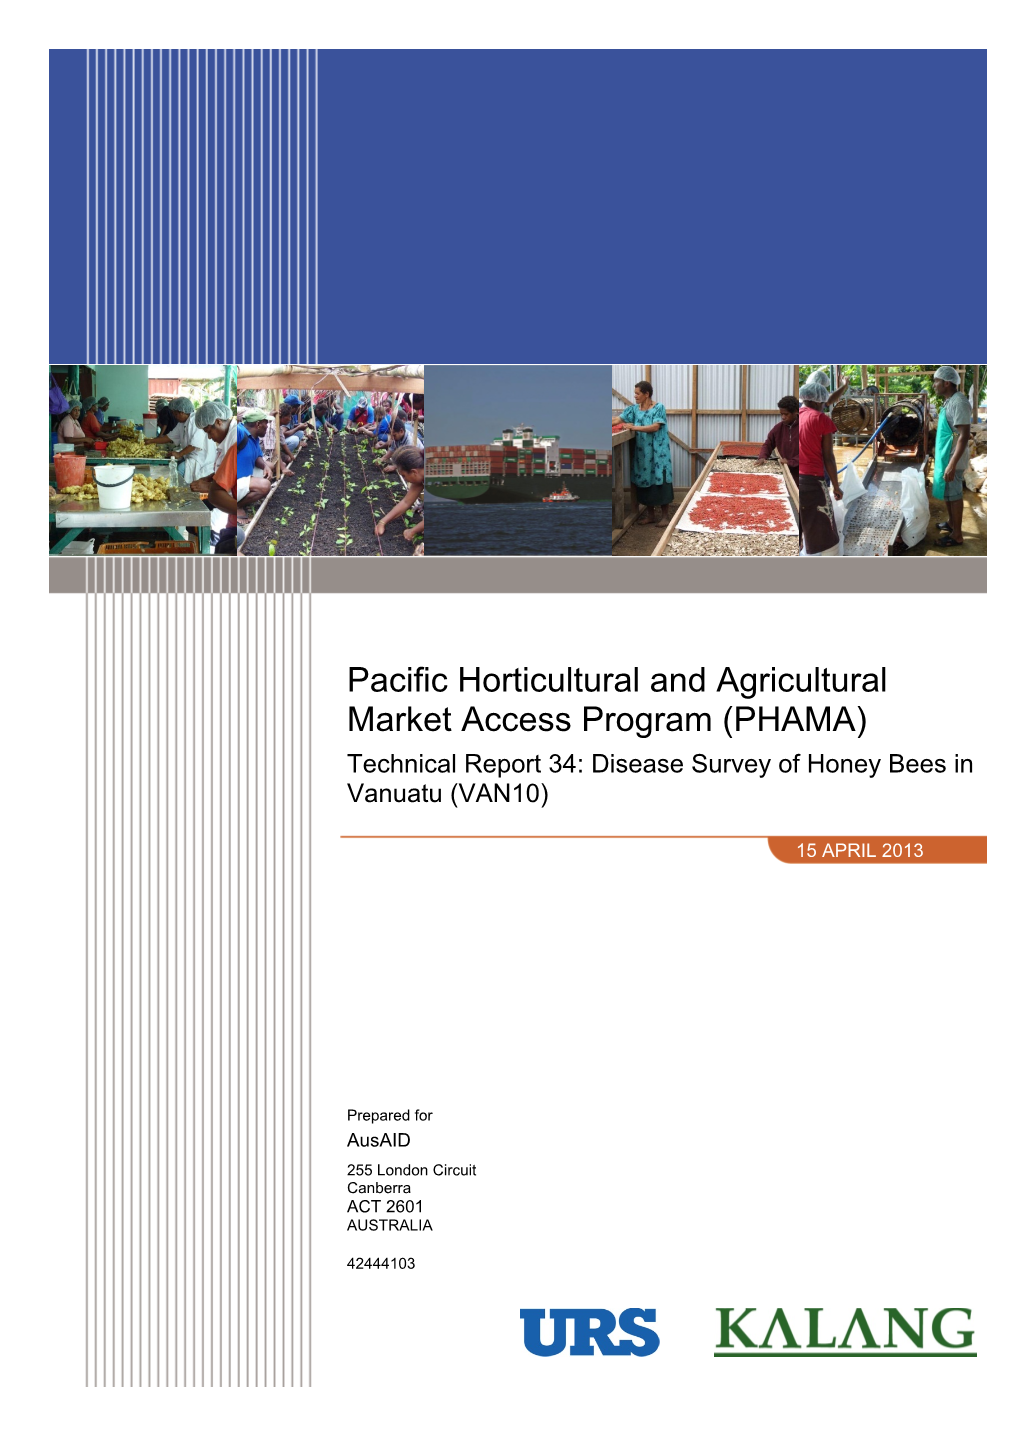 Pacific Horticultural and Agricultural Market Access Program (PHAMA) Technical Report 34: Disease Survey of Honey Bees in Vanuatu (VAN10)